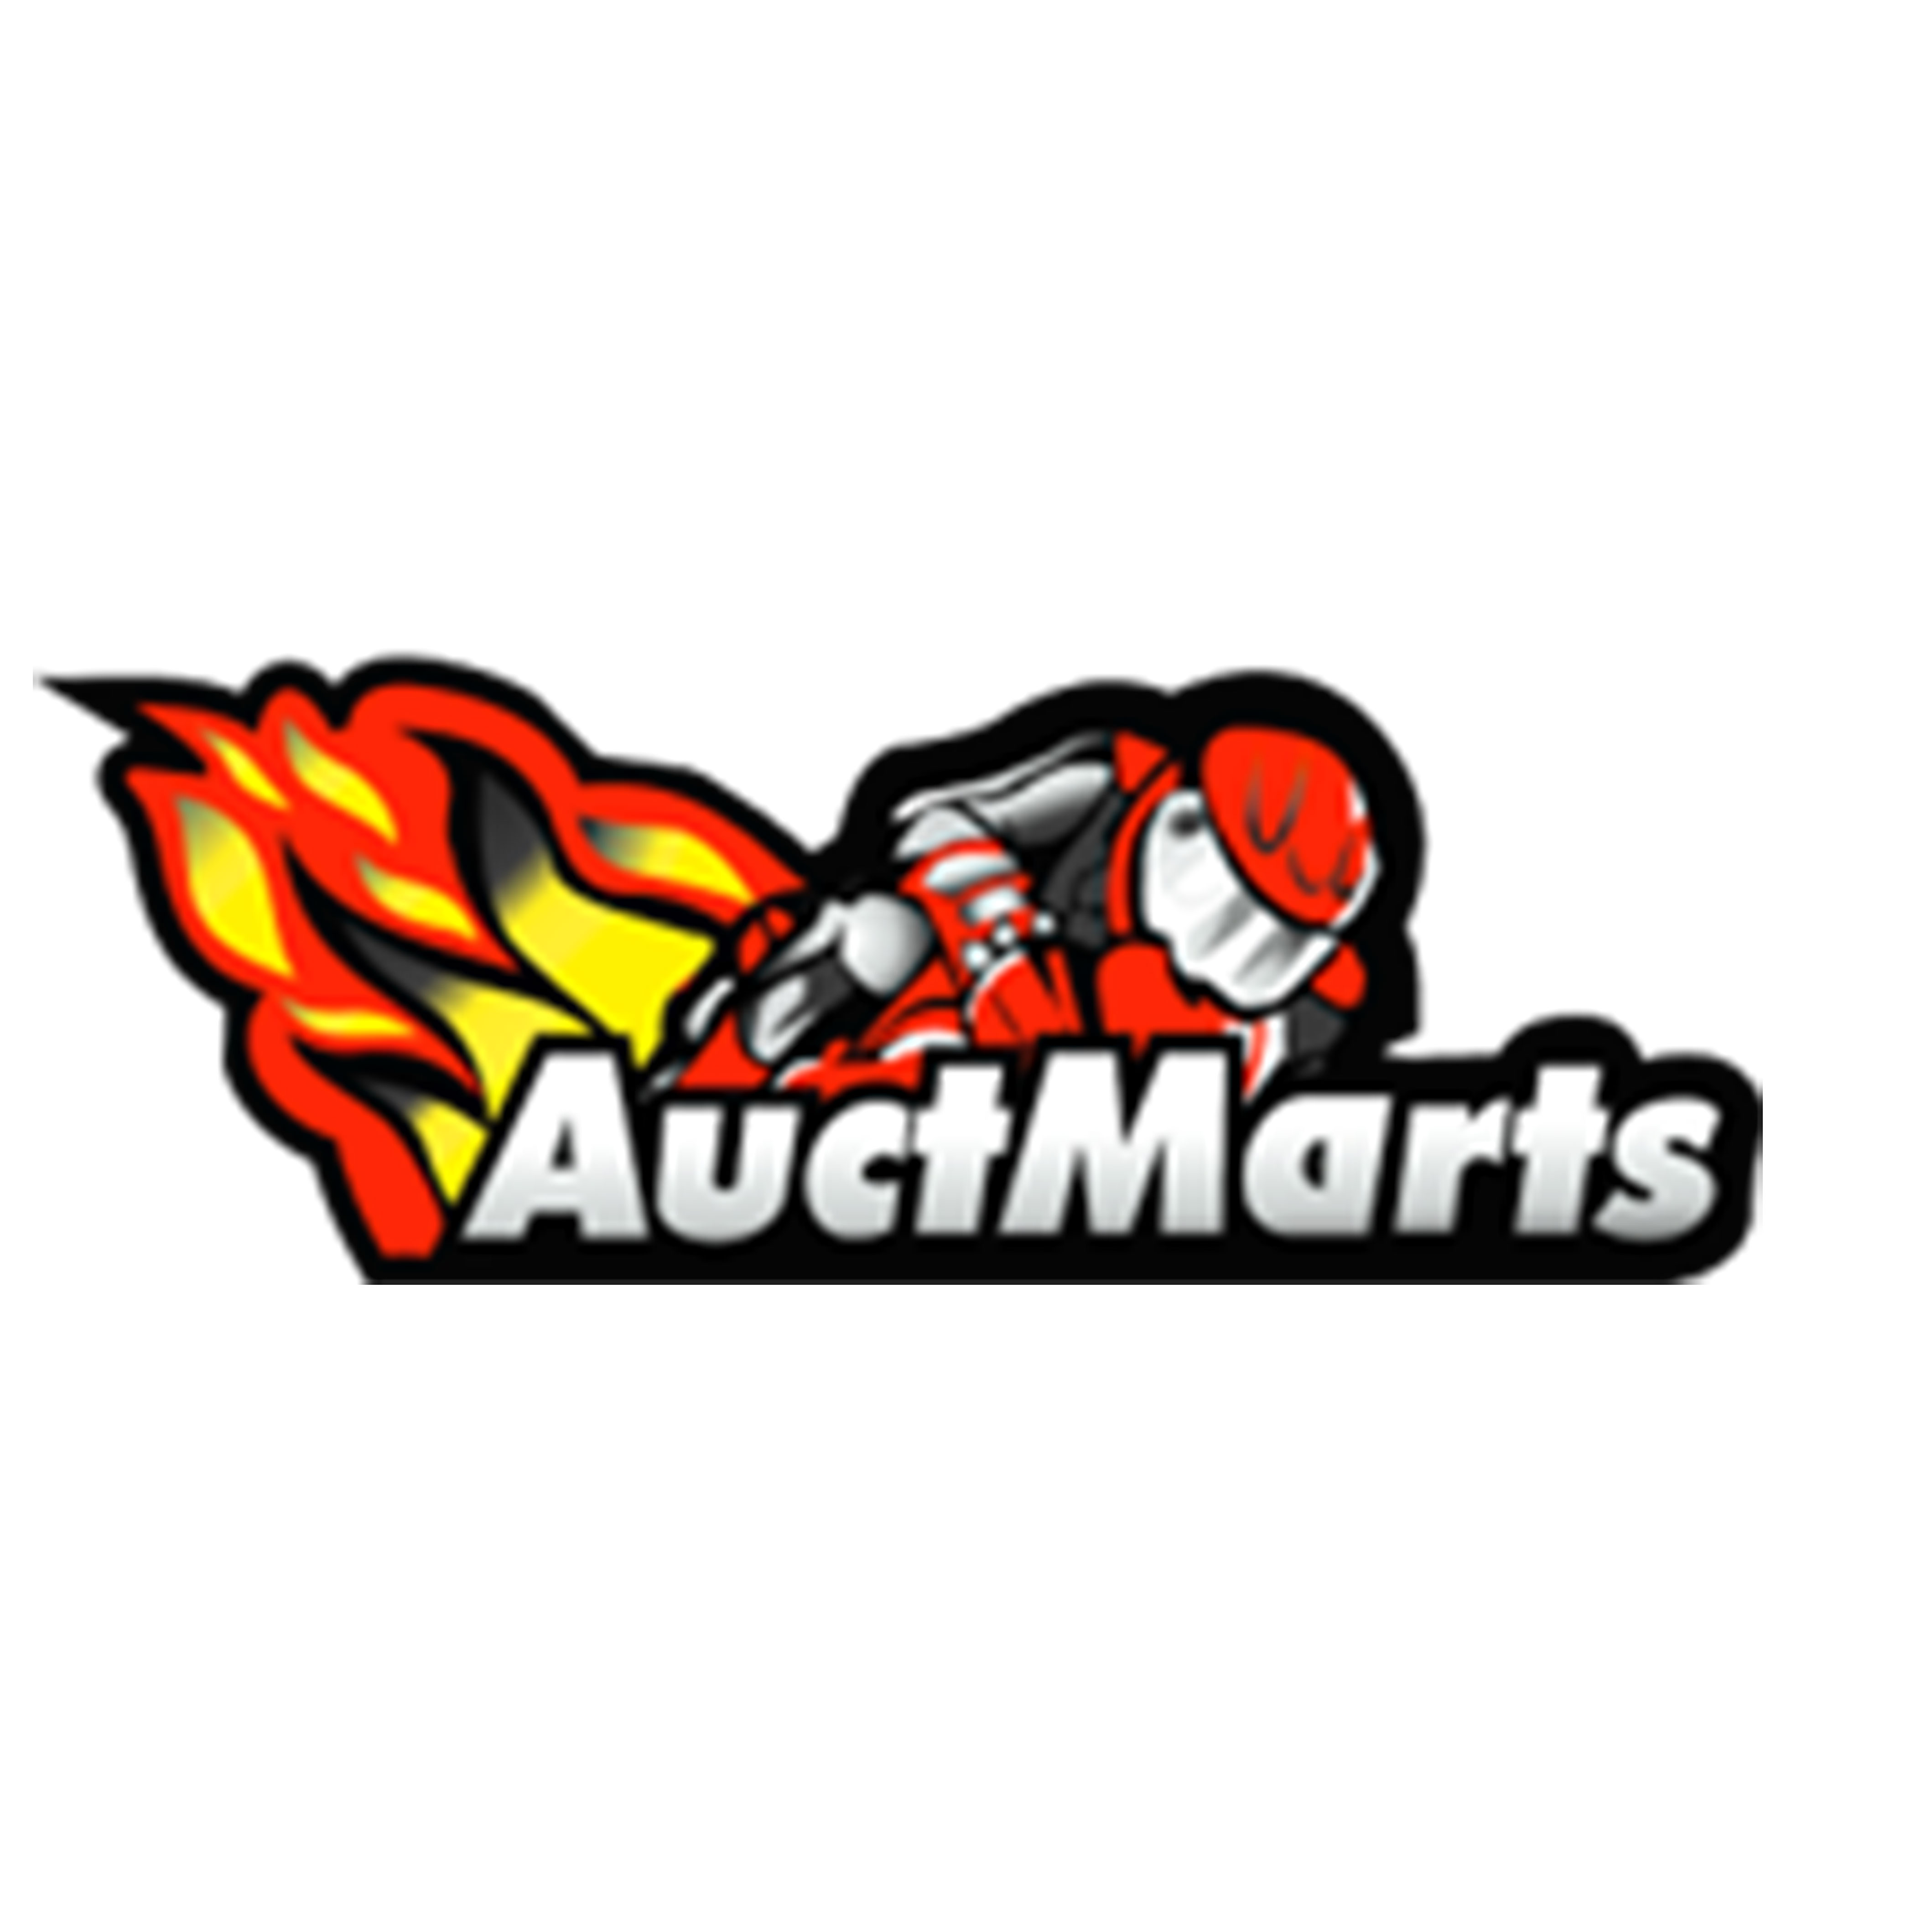 Auctmarts Trading coupon codes